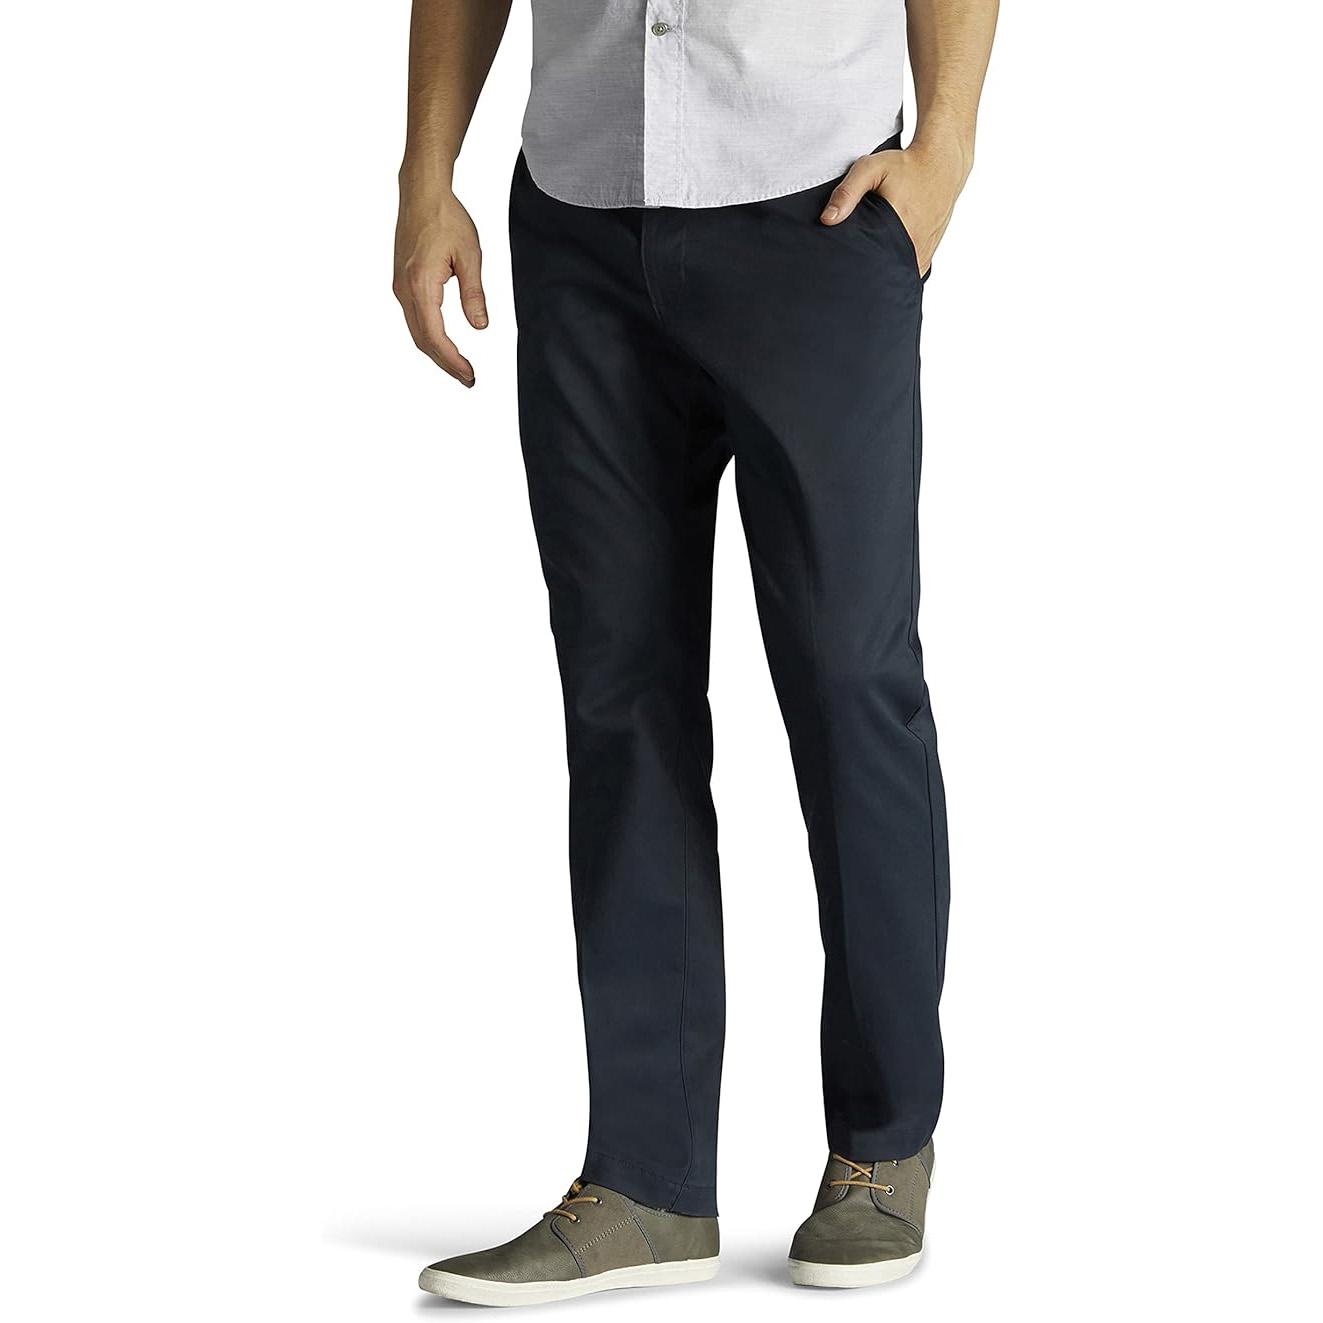 Lee Mens Extreme Motion Flat Front Slim Straight Pant for $17